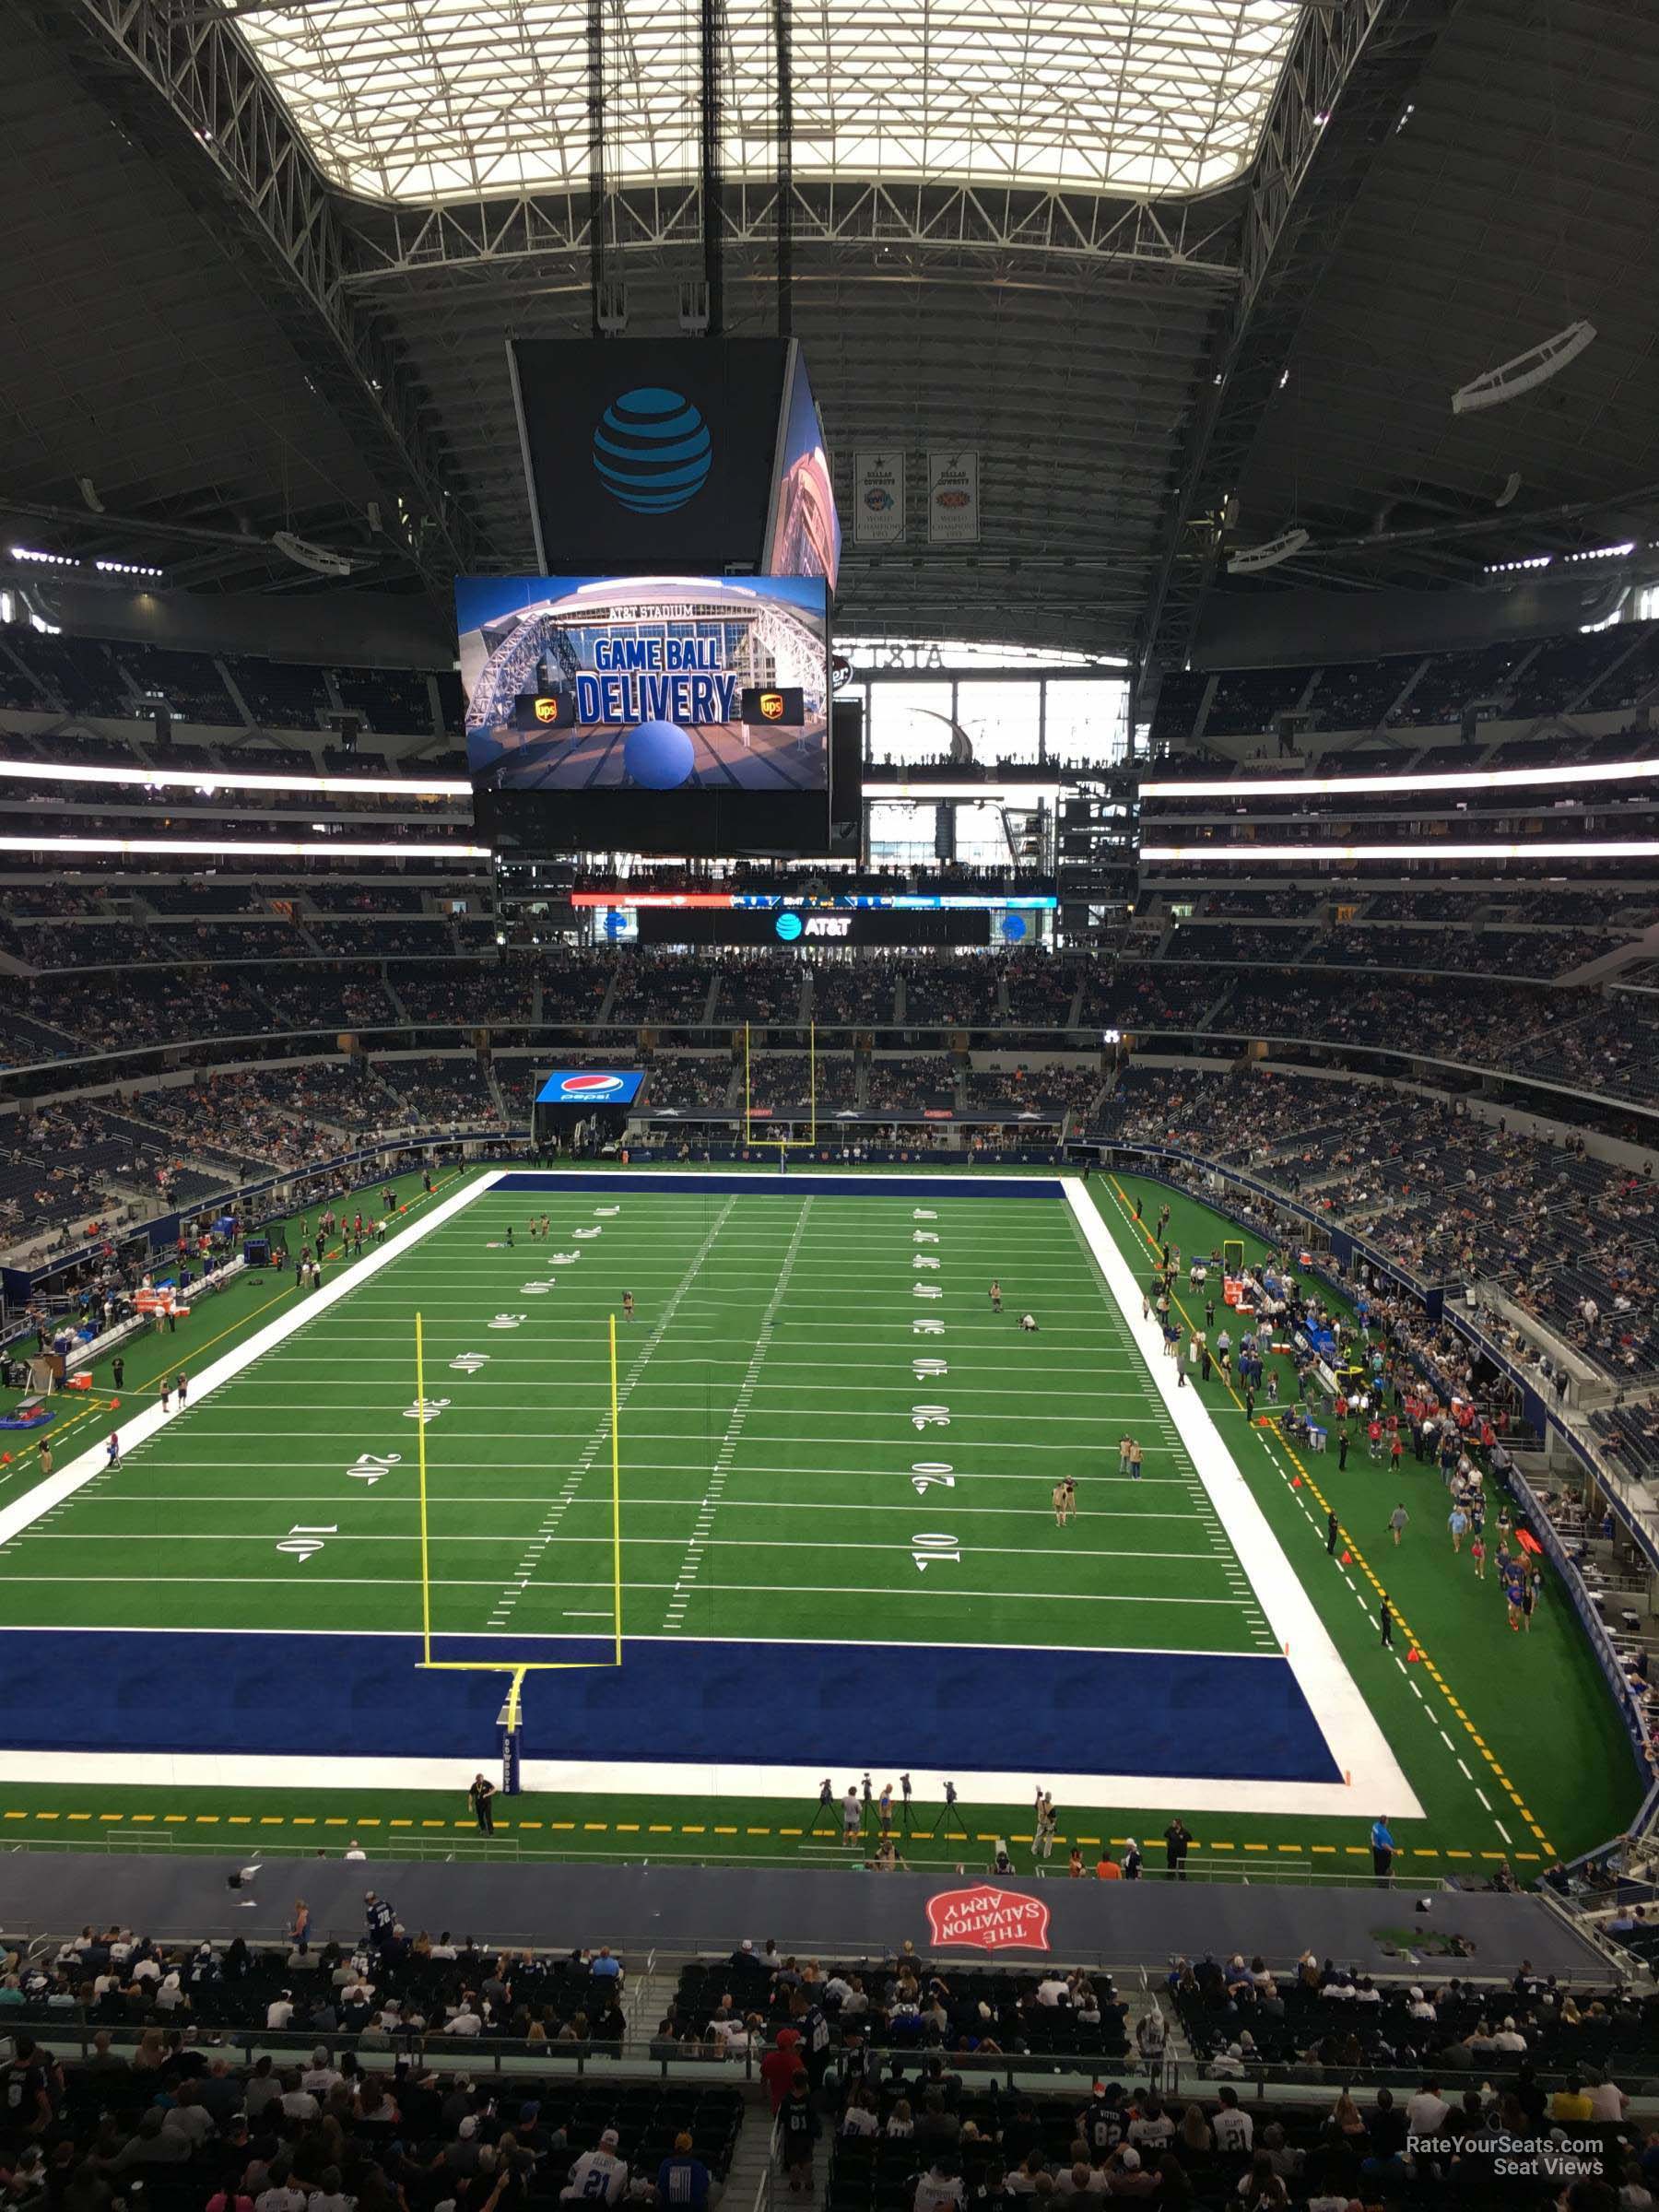 Section 322 at AT&T Stadium 